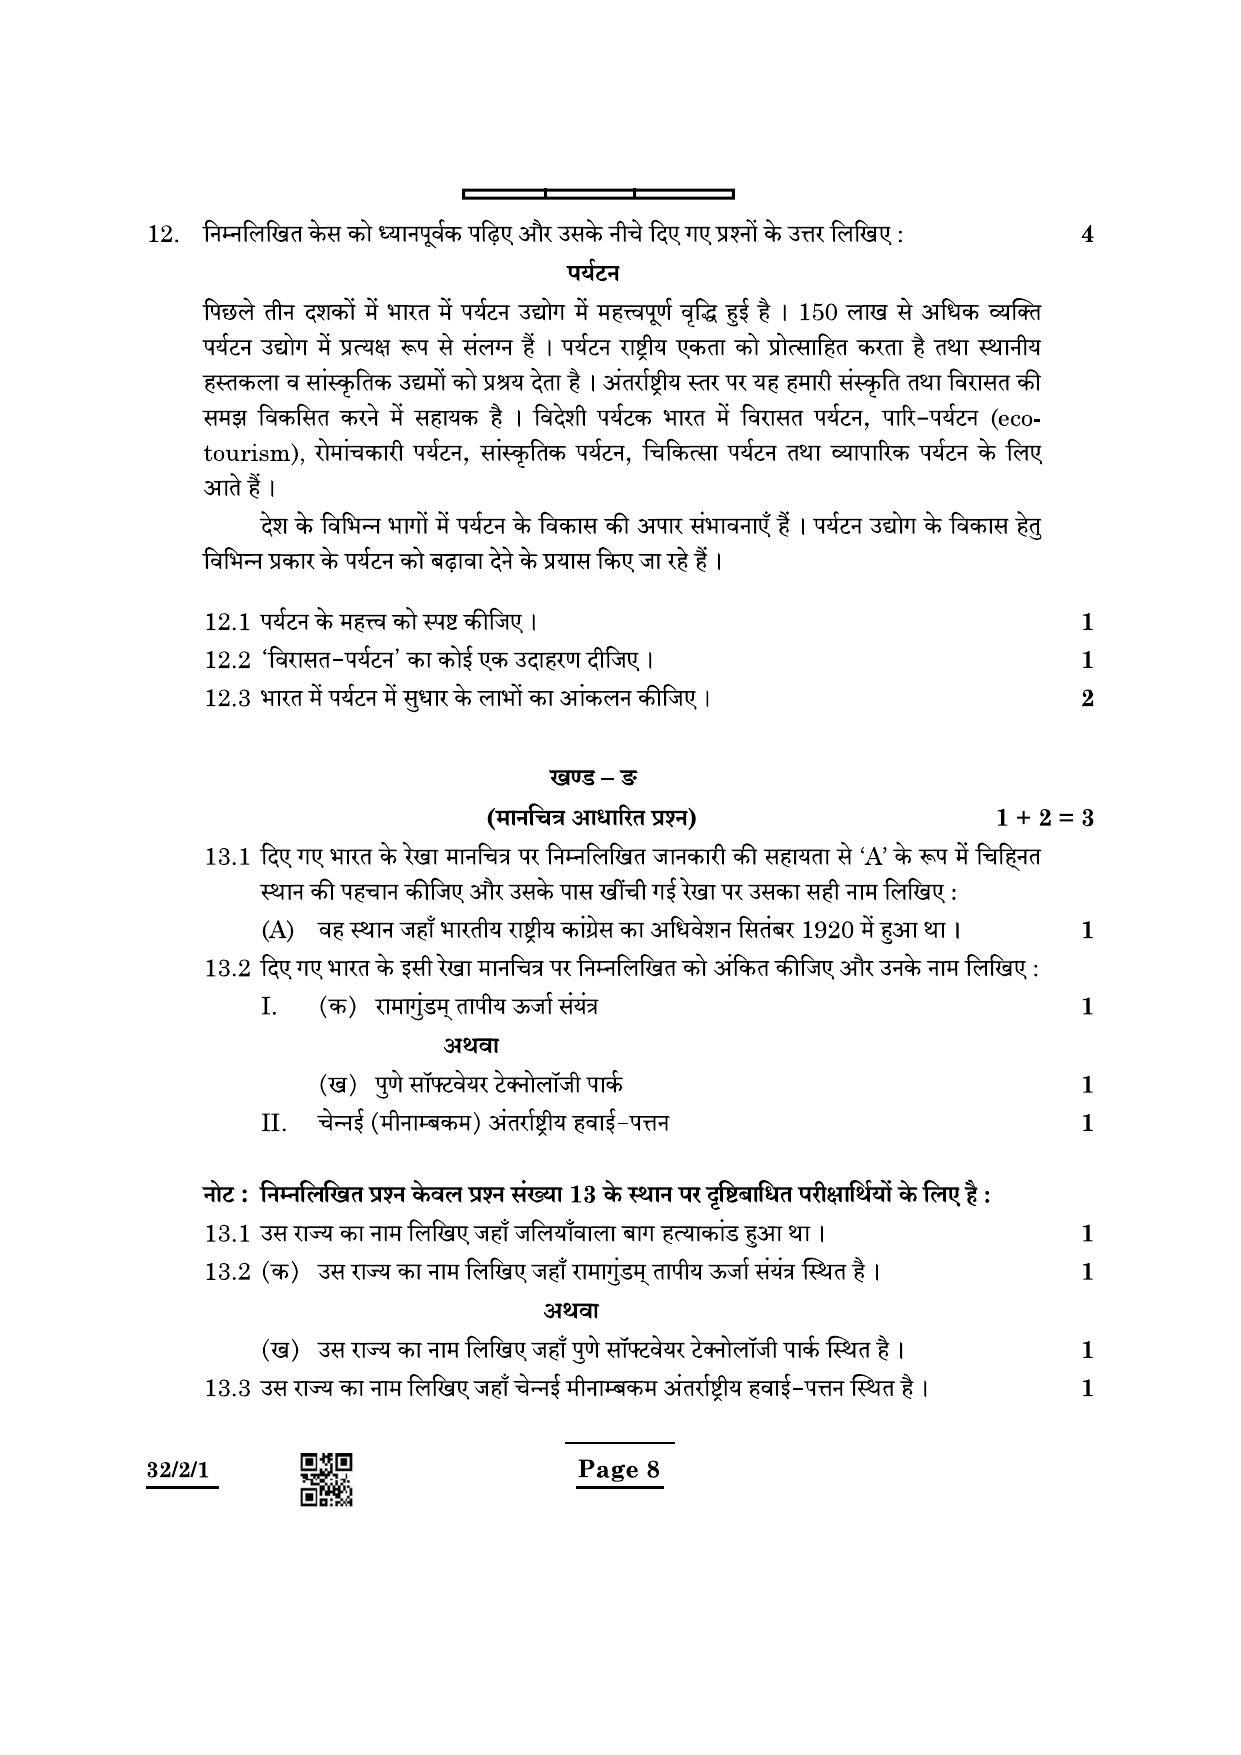 CBSE Class 10 32-2-1 Social Science 2022 Question Paper - Page 8